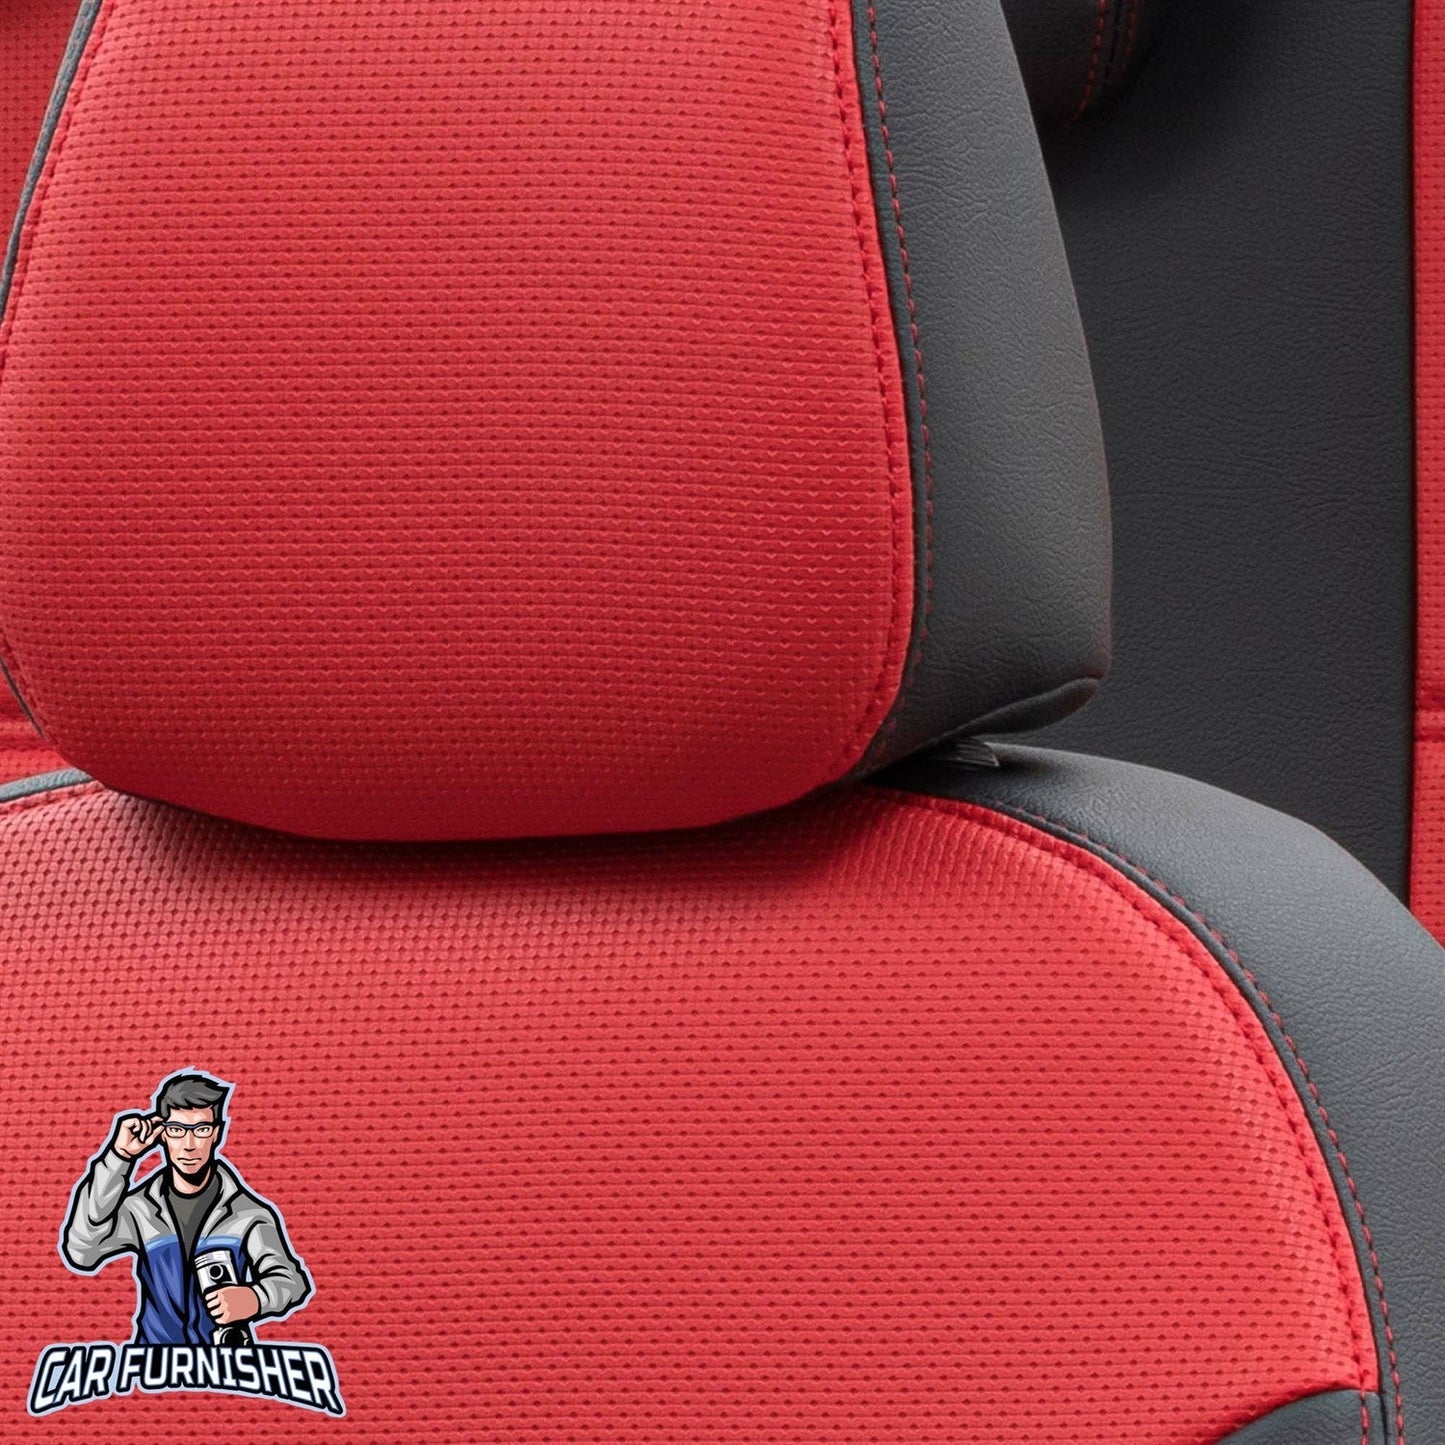 Iveco Eurocargo Seat Cover New York Leather Design Red Leather